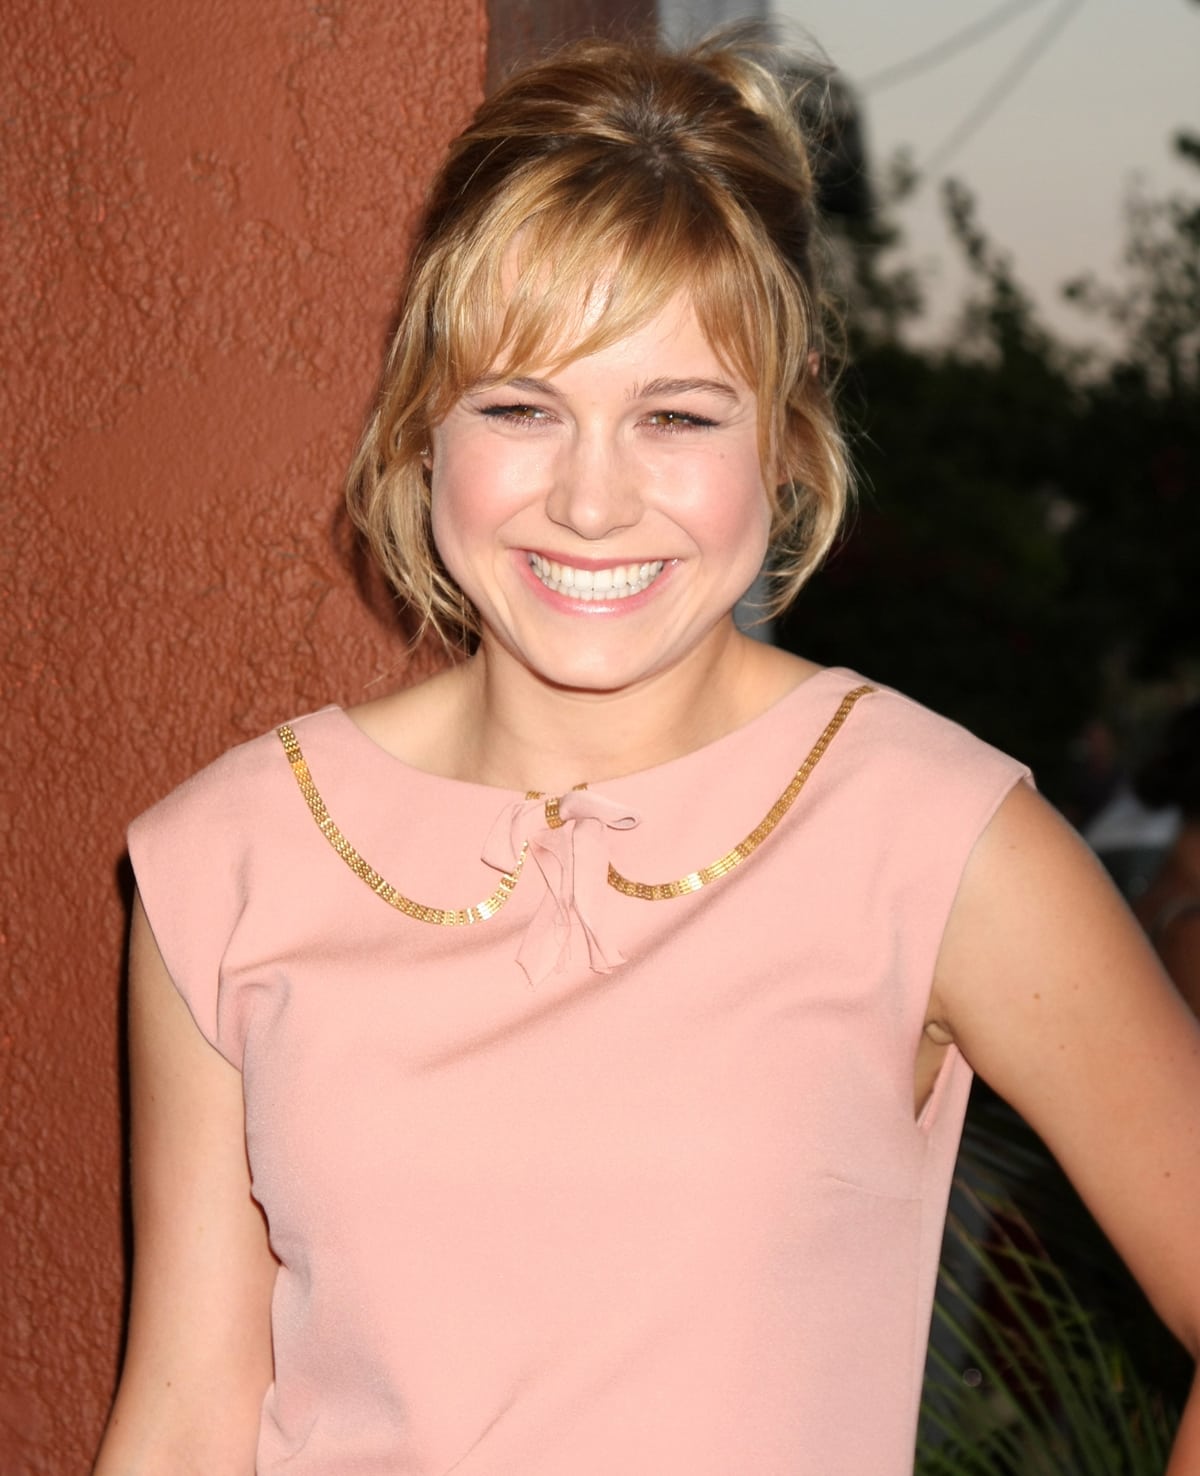 Brie Larson was 19 years old when Tanner Hall had its world premiere at the Toronto International Film Festival on September 14, 2009